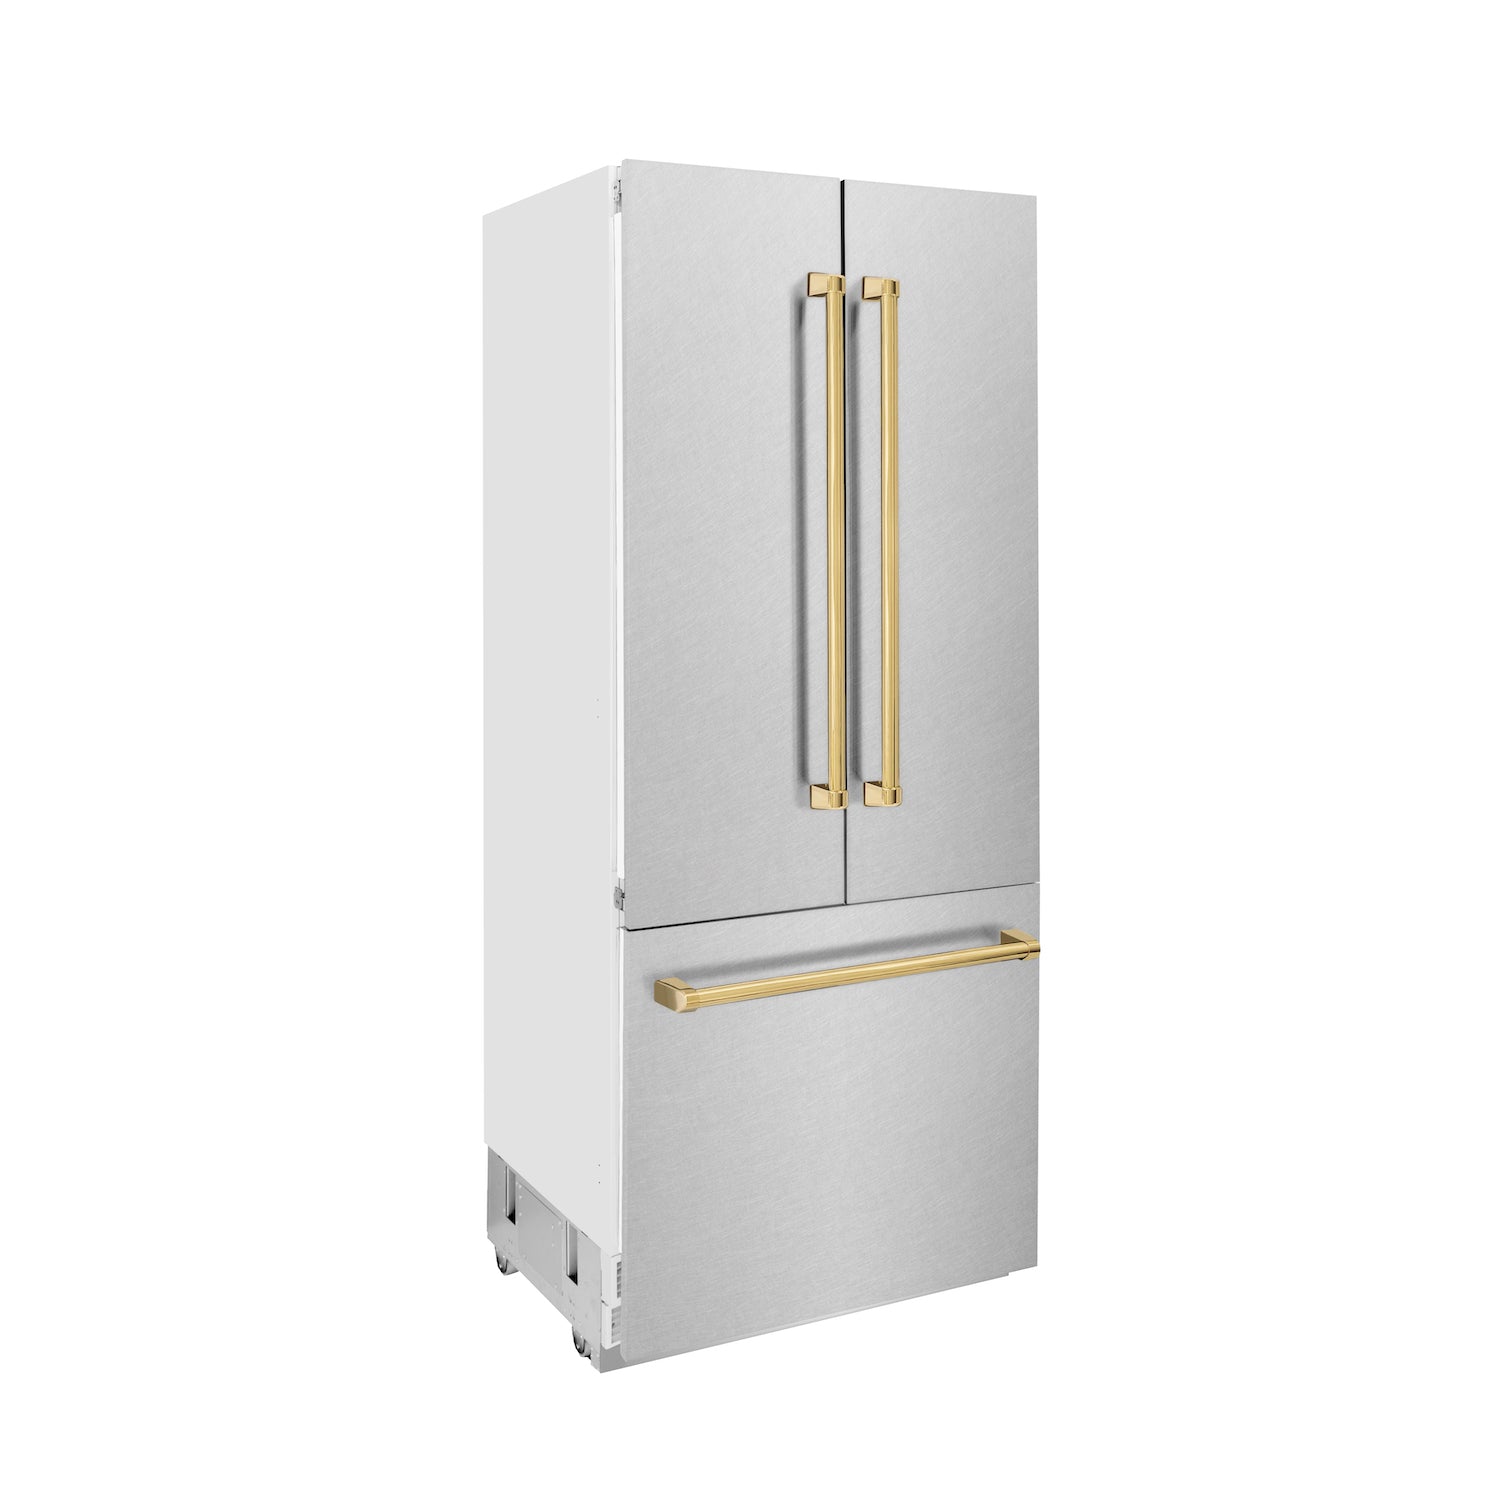 ZLINE Autograph Edition 36 in. 19.6 cu. ft. Built-in 2-Door Bottom Freezer Refrigerator with Internal Water and Ice Dispenser in Fingerprint Resistant Stainless Steel with Polished Gold Accents (RBIVZ-SN-36-G) side.